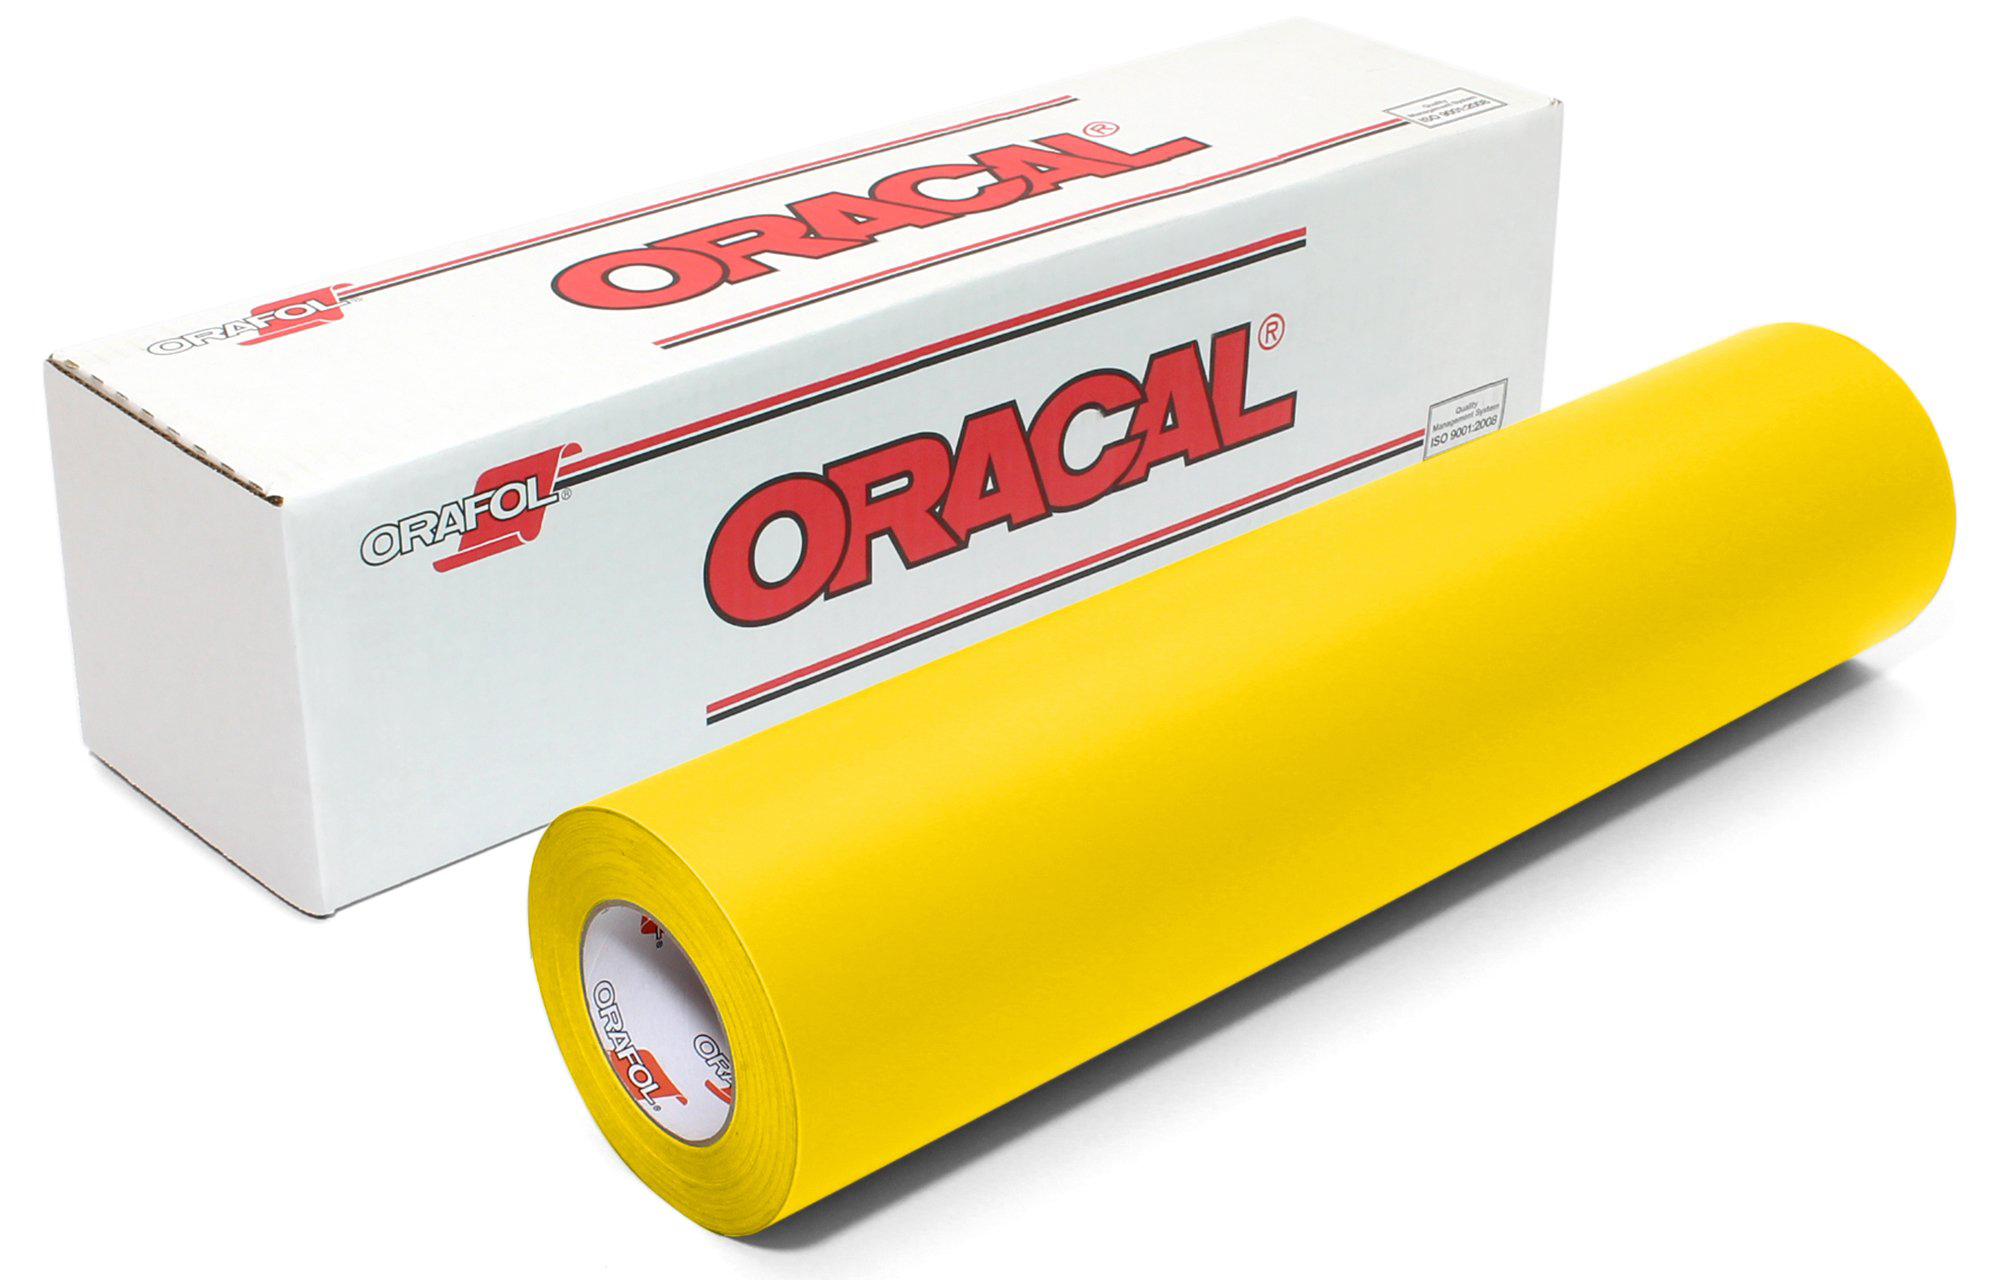 30IN LIGHT YELLOW 631 EXHIBITION CAL - Oracal 631 Exhibition Calendered PVC Film